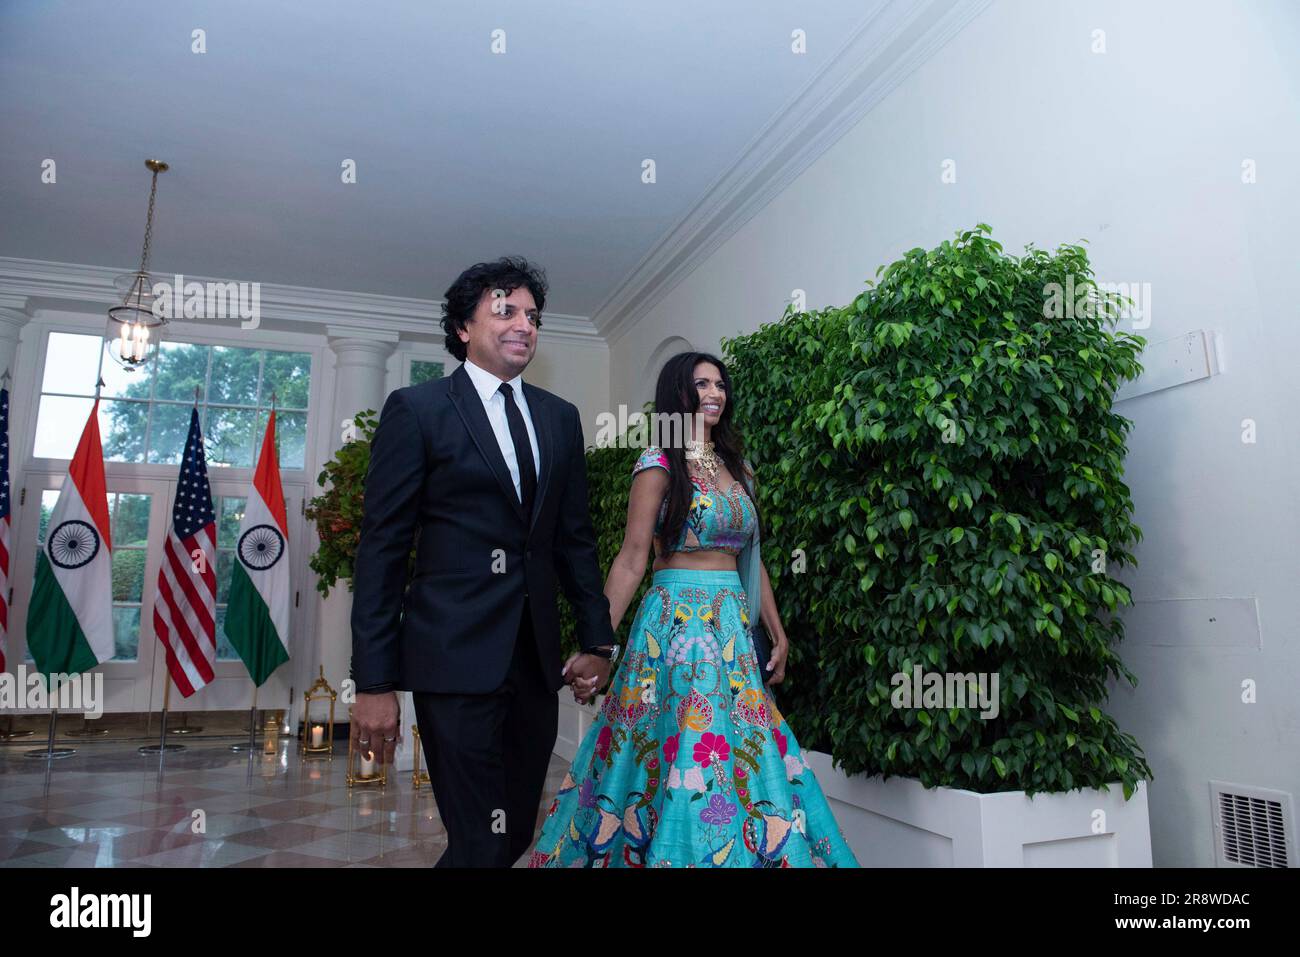 https://c8.alamy.com/comp/2R8WDAC/washington-vereinigte-staaten-22nd-june-2023-director-m-night-shyamalan-and-dr-bhavna-shyamalan-arrive-to-attend-a-state-dinner-in-honor-of-prime-minister-narendra-modi-of-the-republic-of-india-hosted-by-united-states-president-joe-biden-and-first-lady-dr-jill-biden-at-the-white-house-in-washington-dc-on-thursday-june-22-2023-credit-annabelle-gordoncnpdpaalamy-live-news-2R8WDAC.jpg